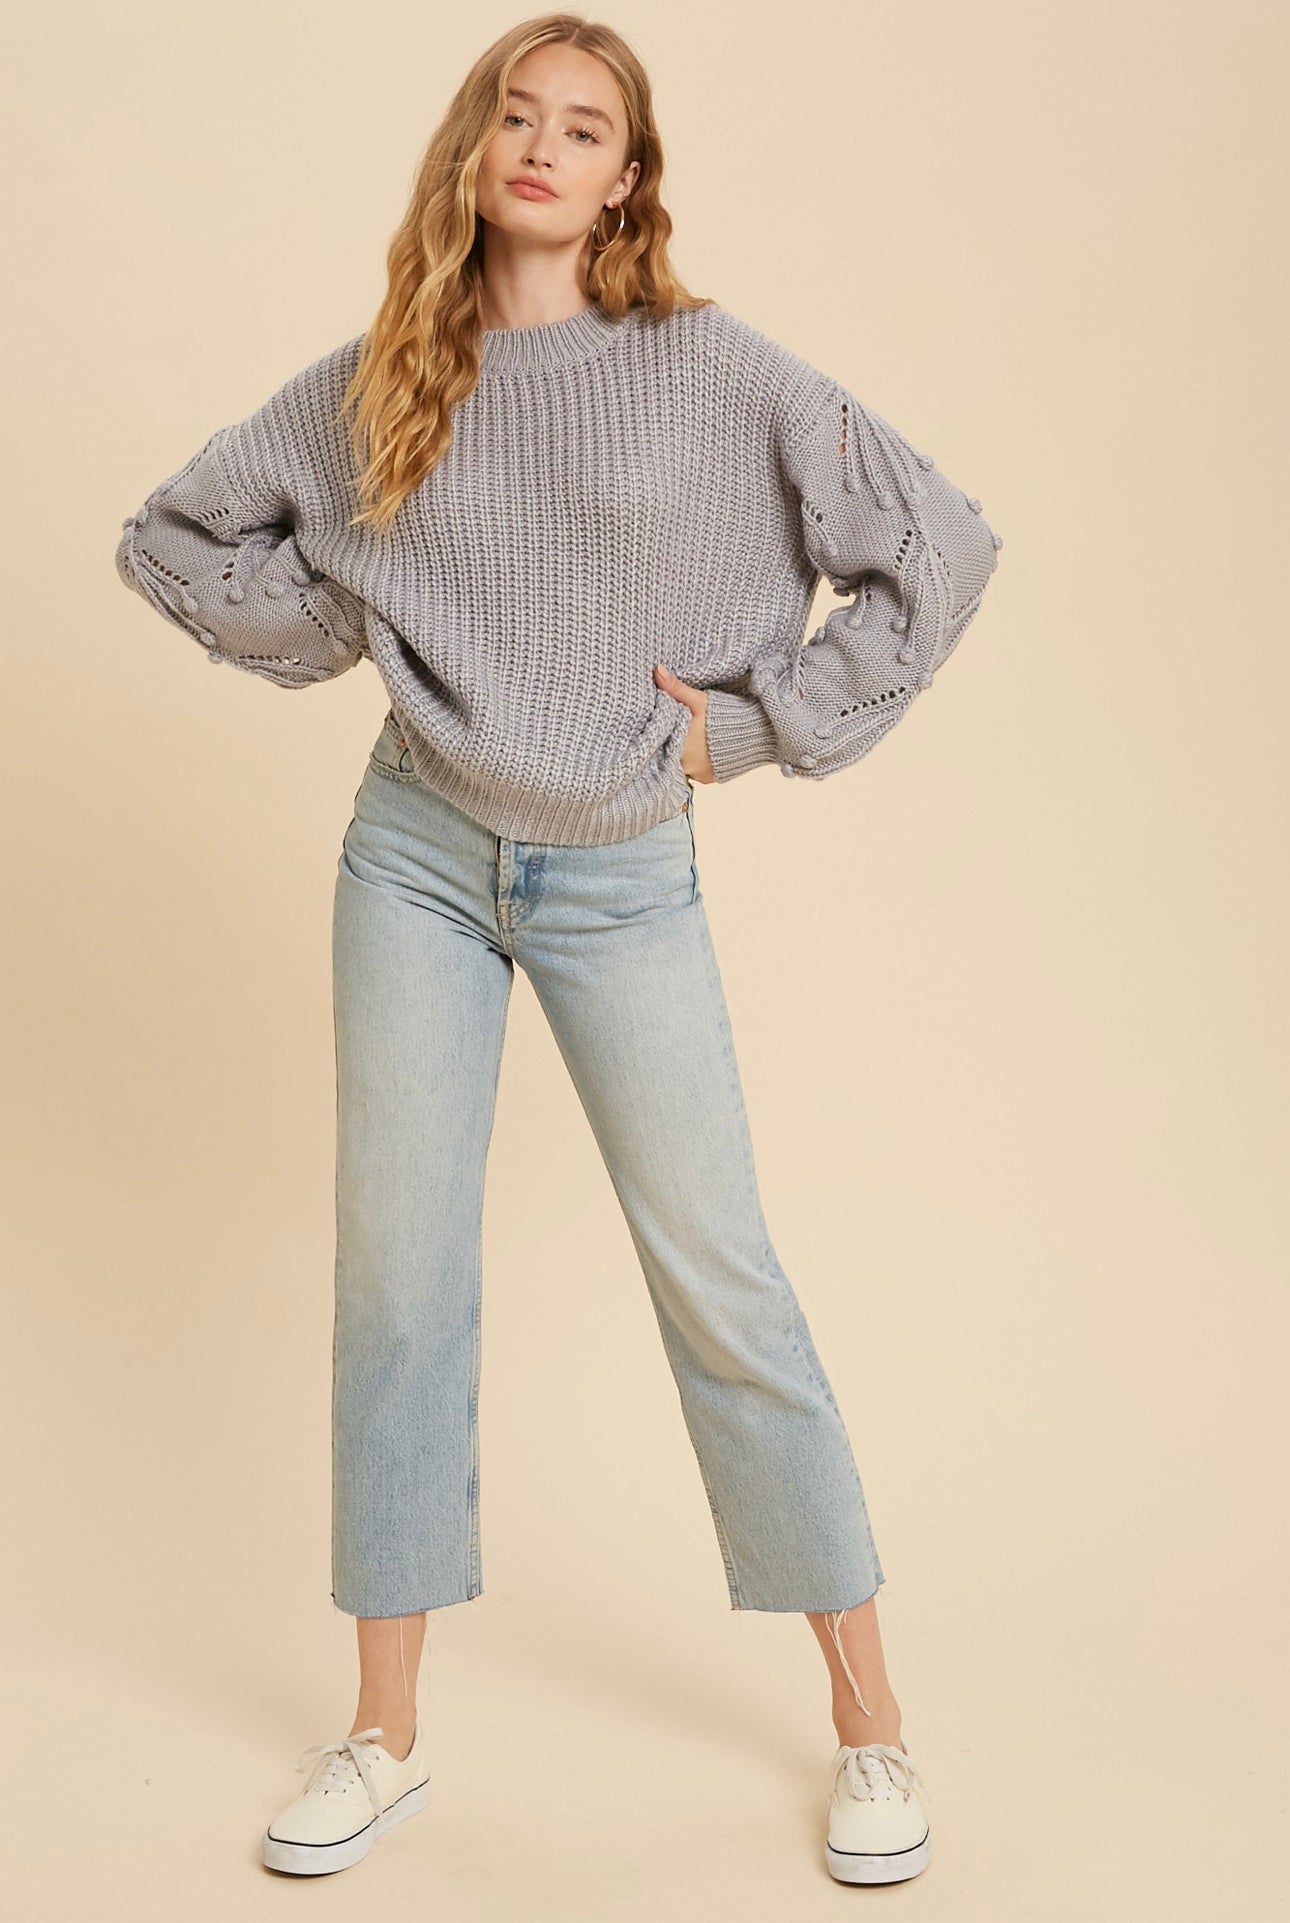 WC Pom Knitted Sweater